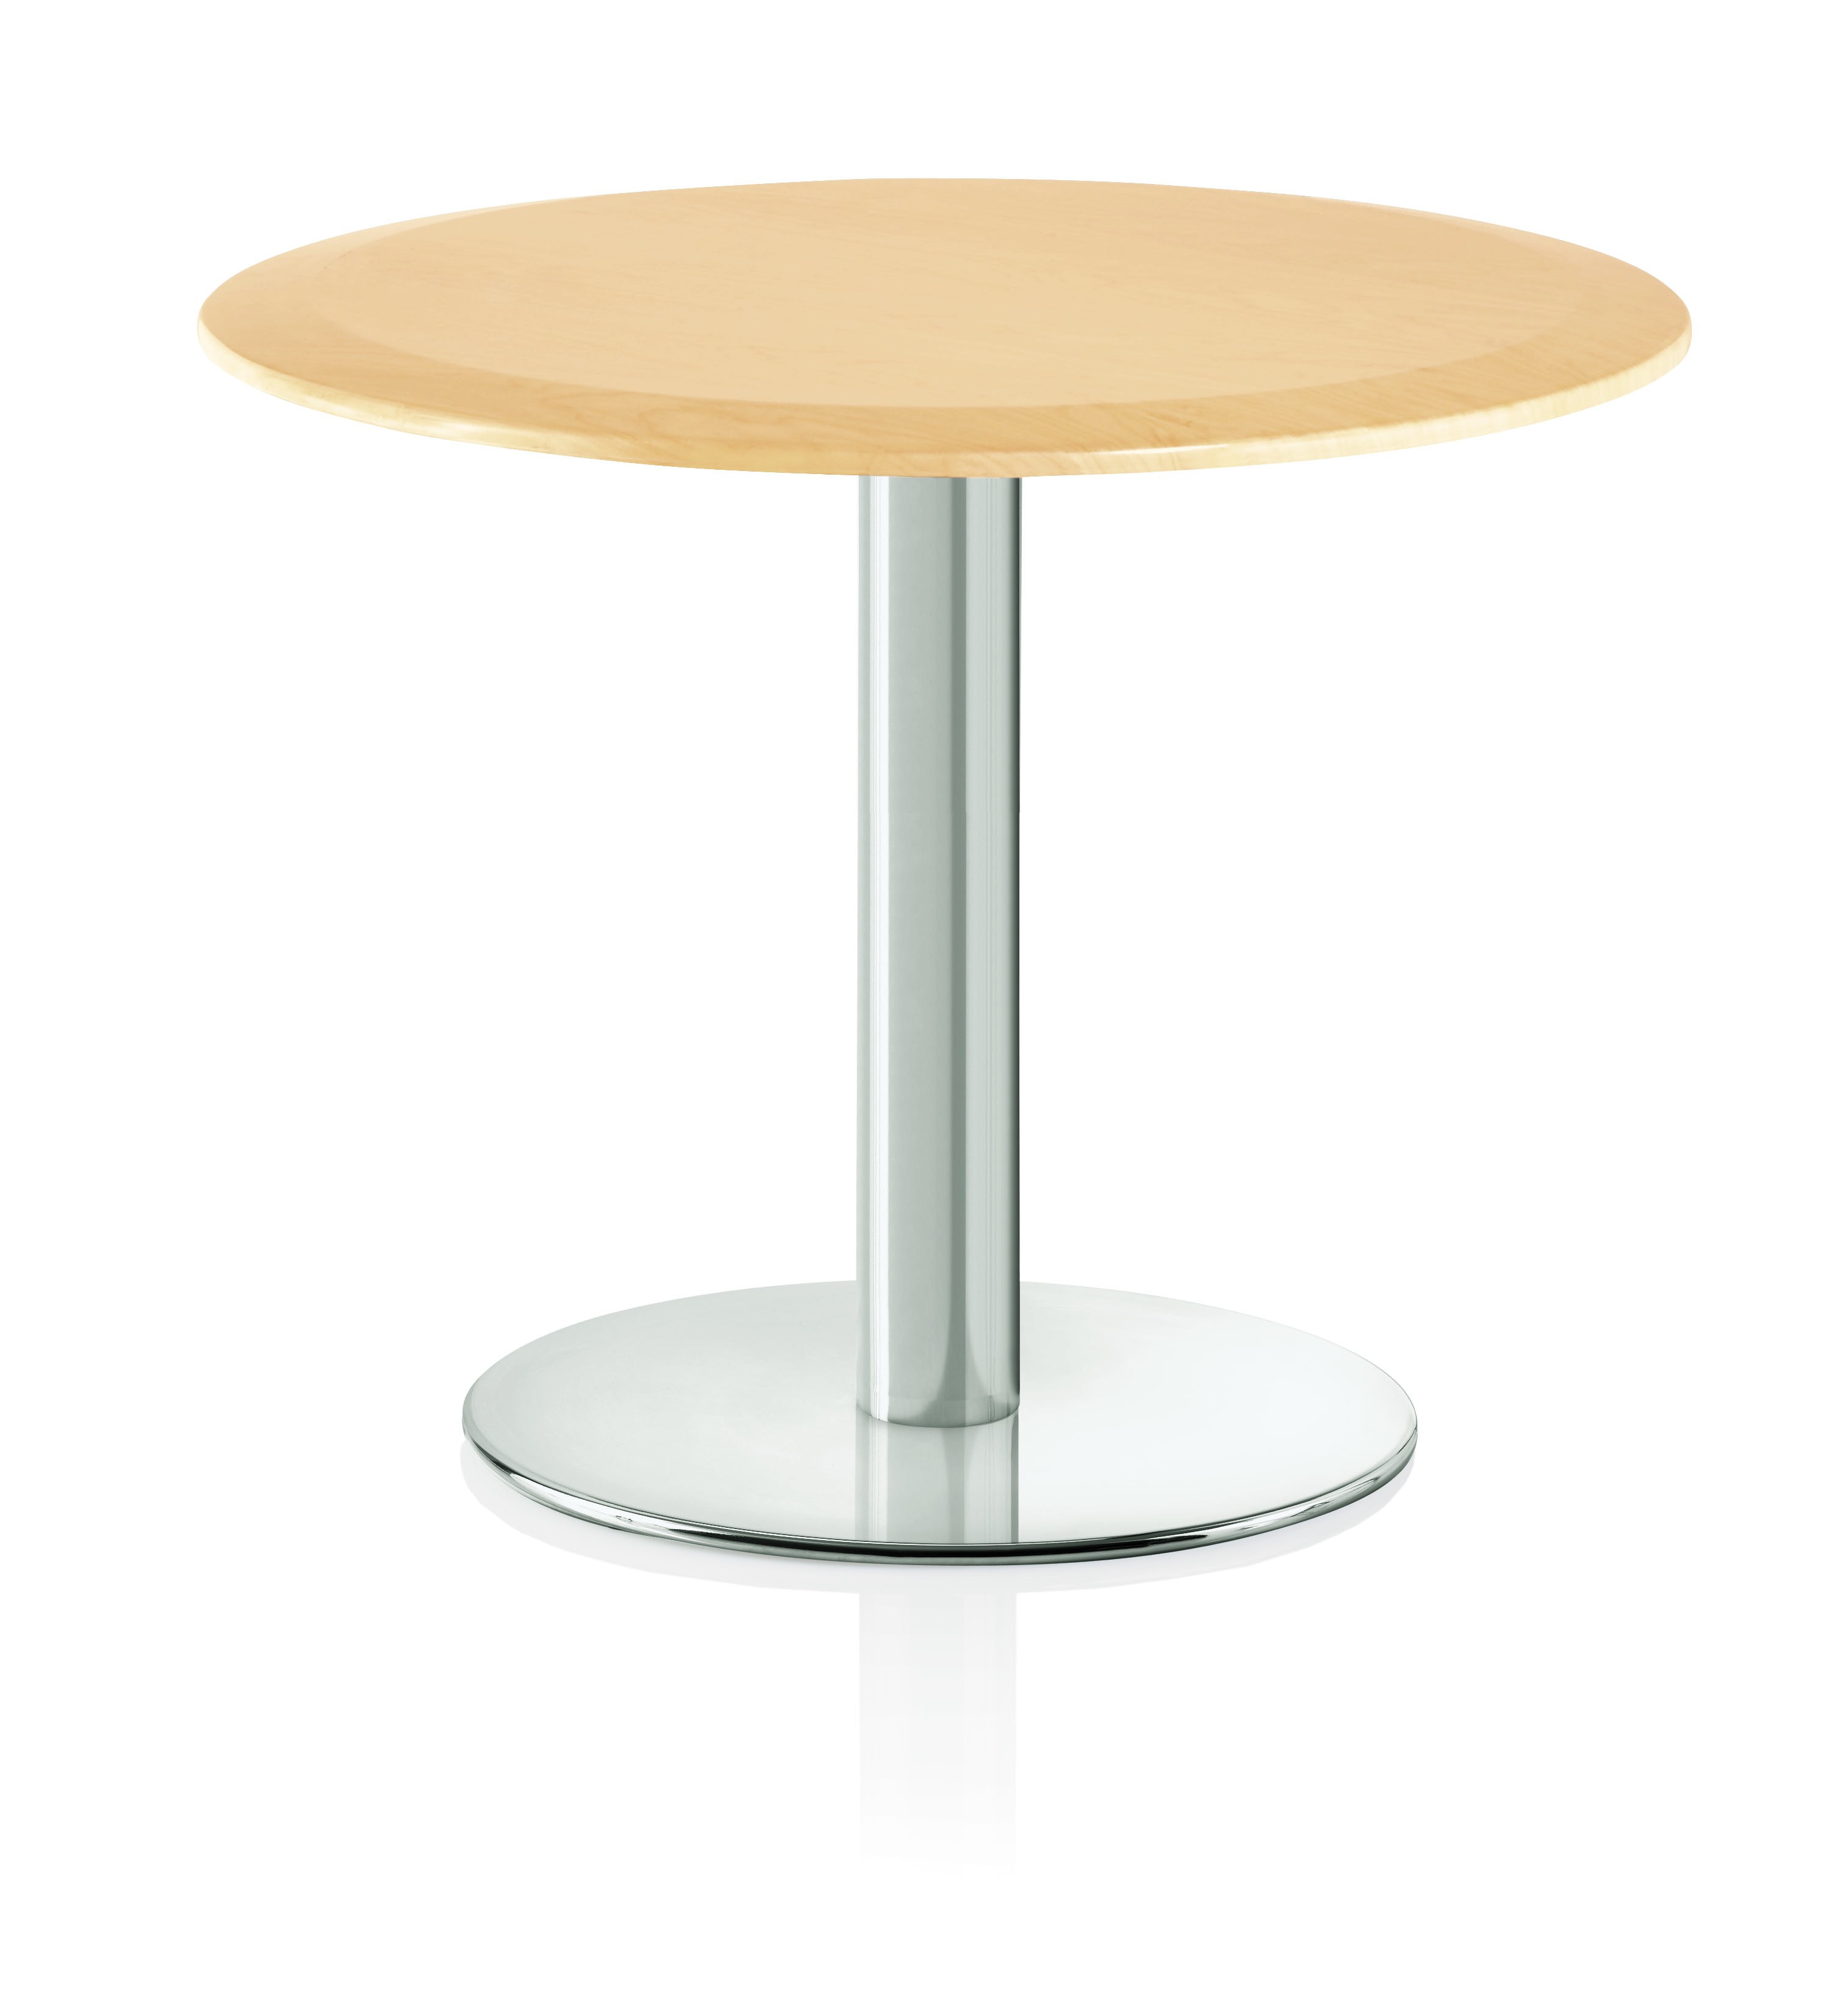 VCE Athens 29" Height Disk Base Round Table